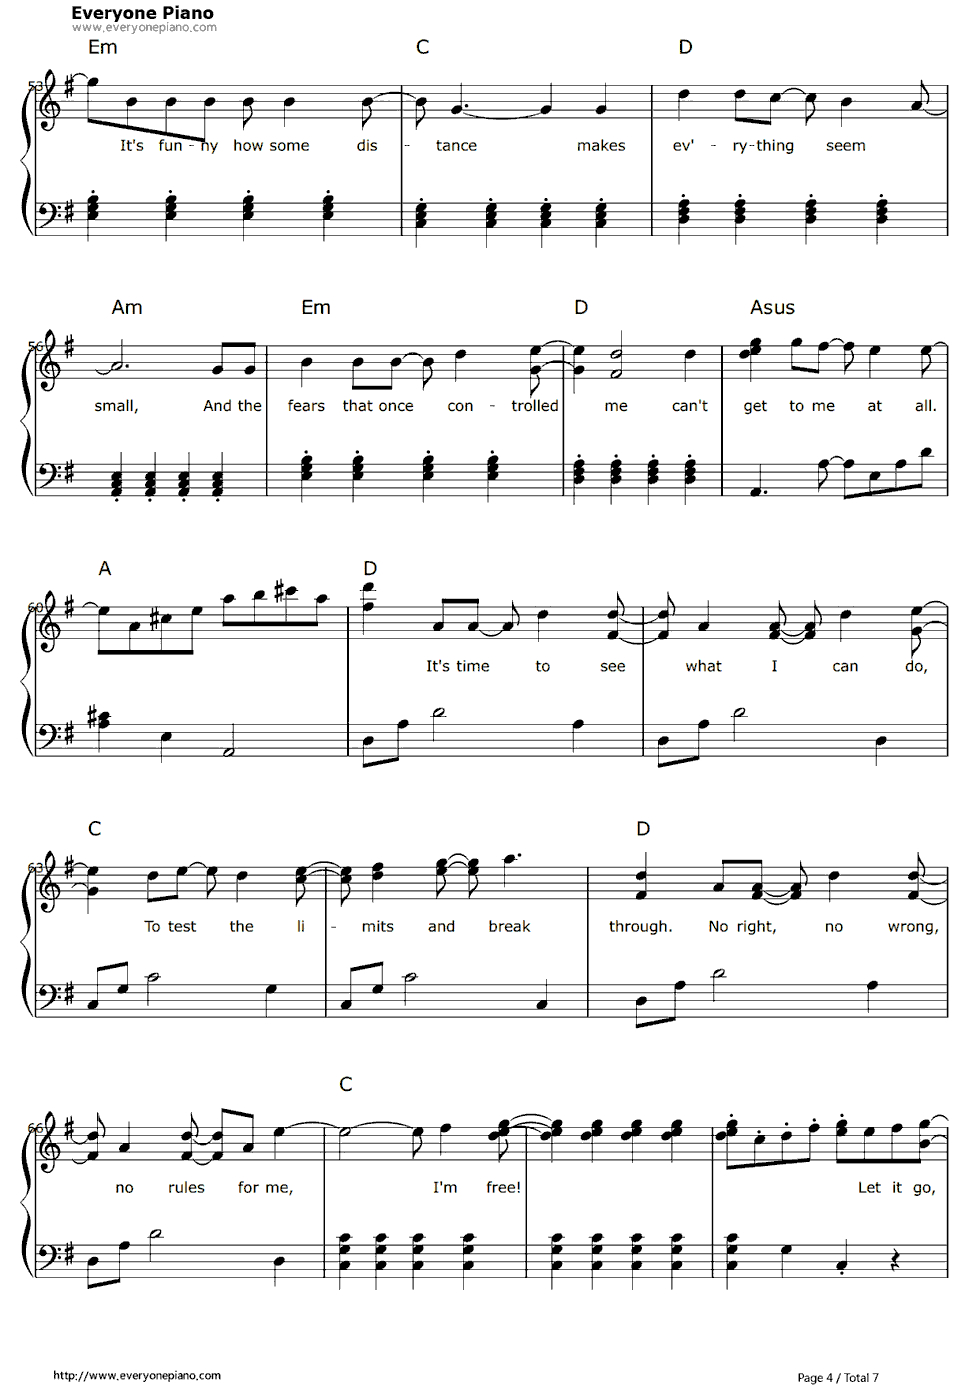 Free Let It Go Easy Version-Frozen Theme Sheet Music Preview 4 - Let It Go Violin Sheet Music Free Printable